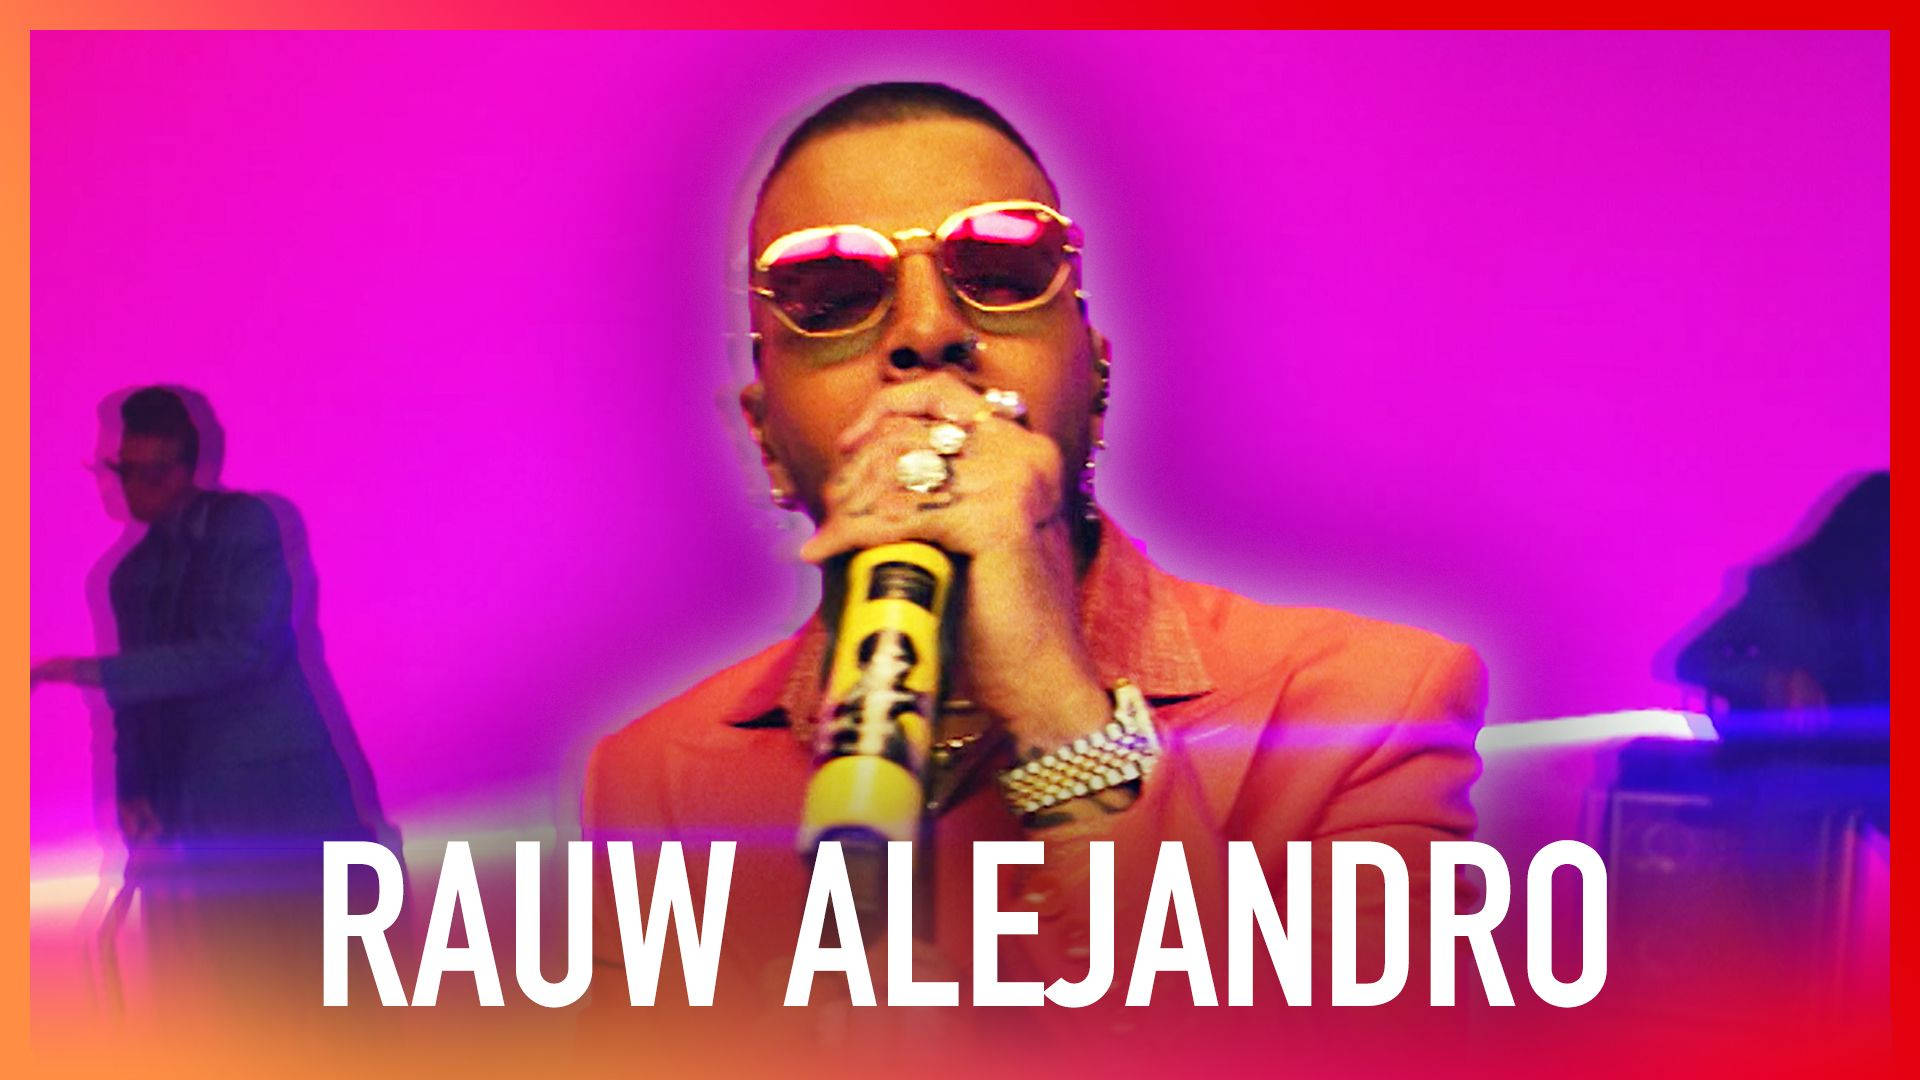 Rauw Alejandro 1920X1080 Wallpaper and Background Image